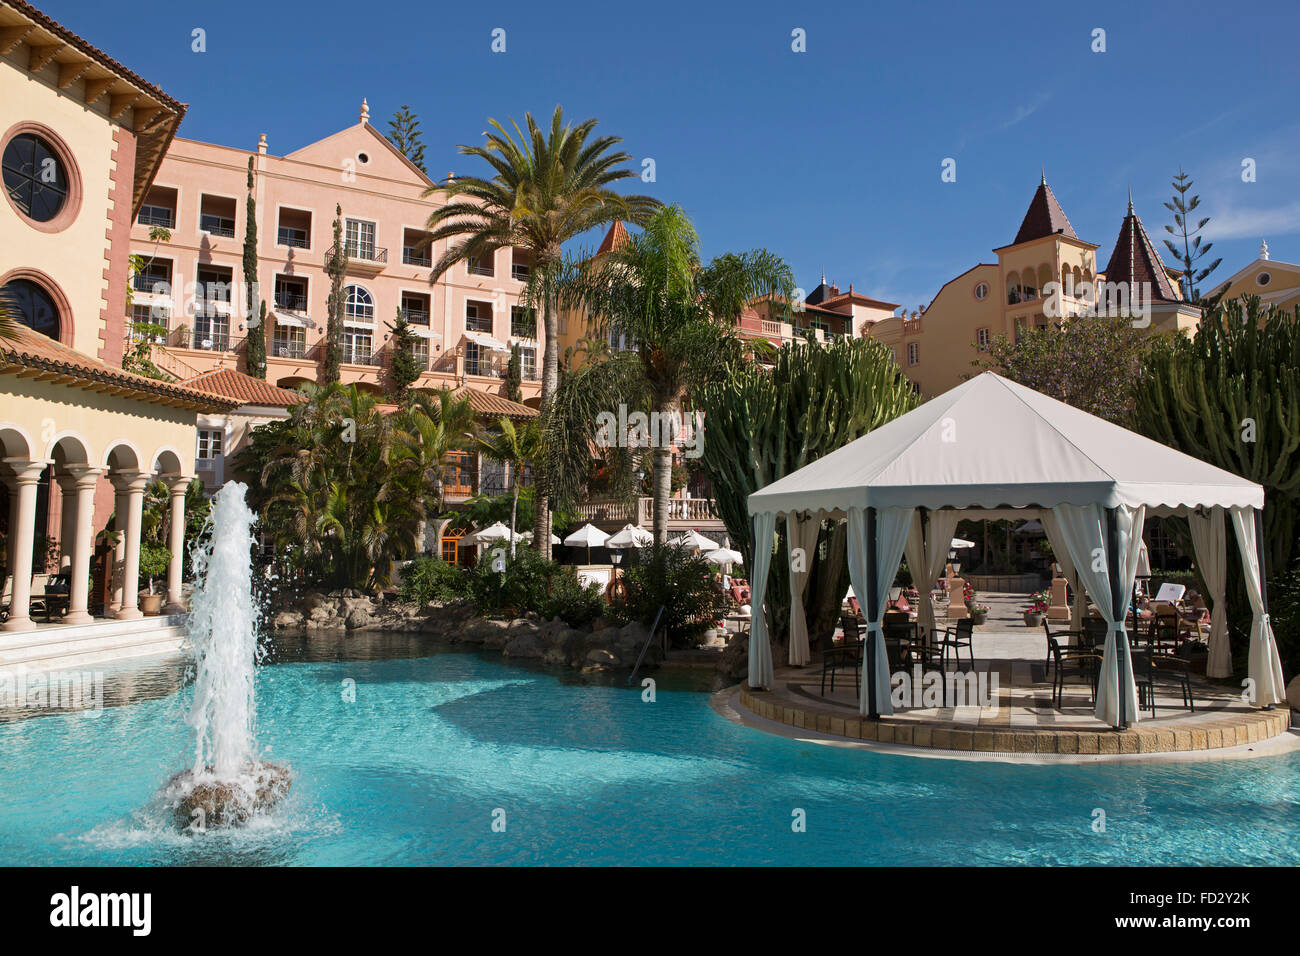 Pool at the Gran Hotel Bahia del Duque at the Costa Adeje in Tenerife, Spain. The design of the luxury hotel is inspired by the Stock Photo